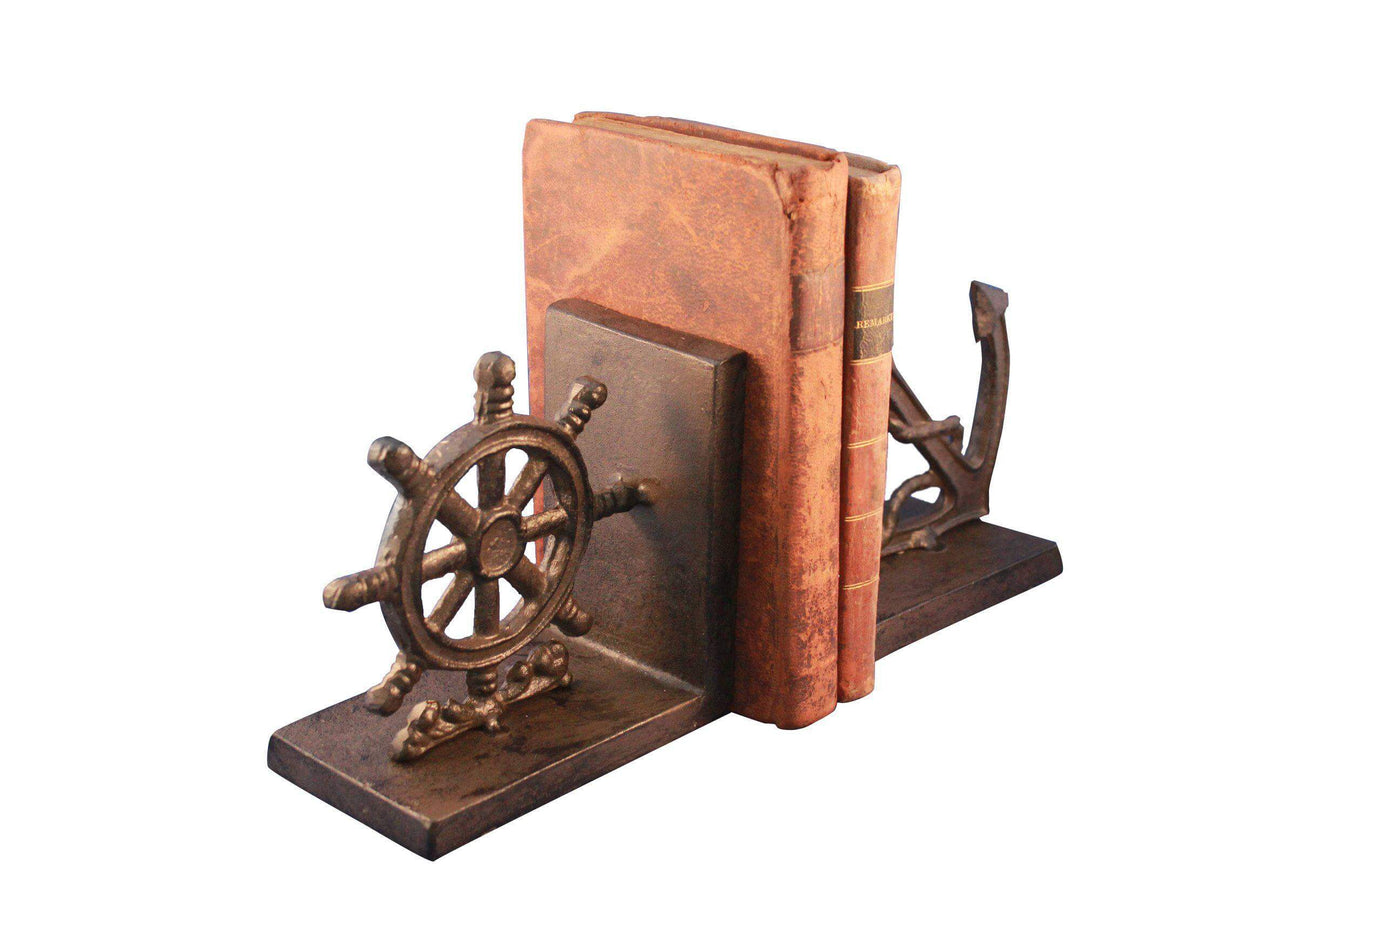 Nautical Anchor & Ship's Wheel Bookends - Cast Iron Metal Sculpture - Rustic Deco Incorporated